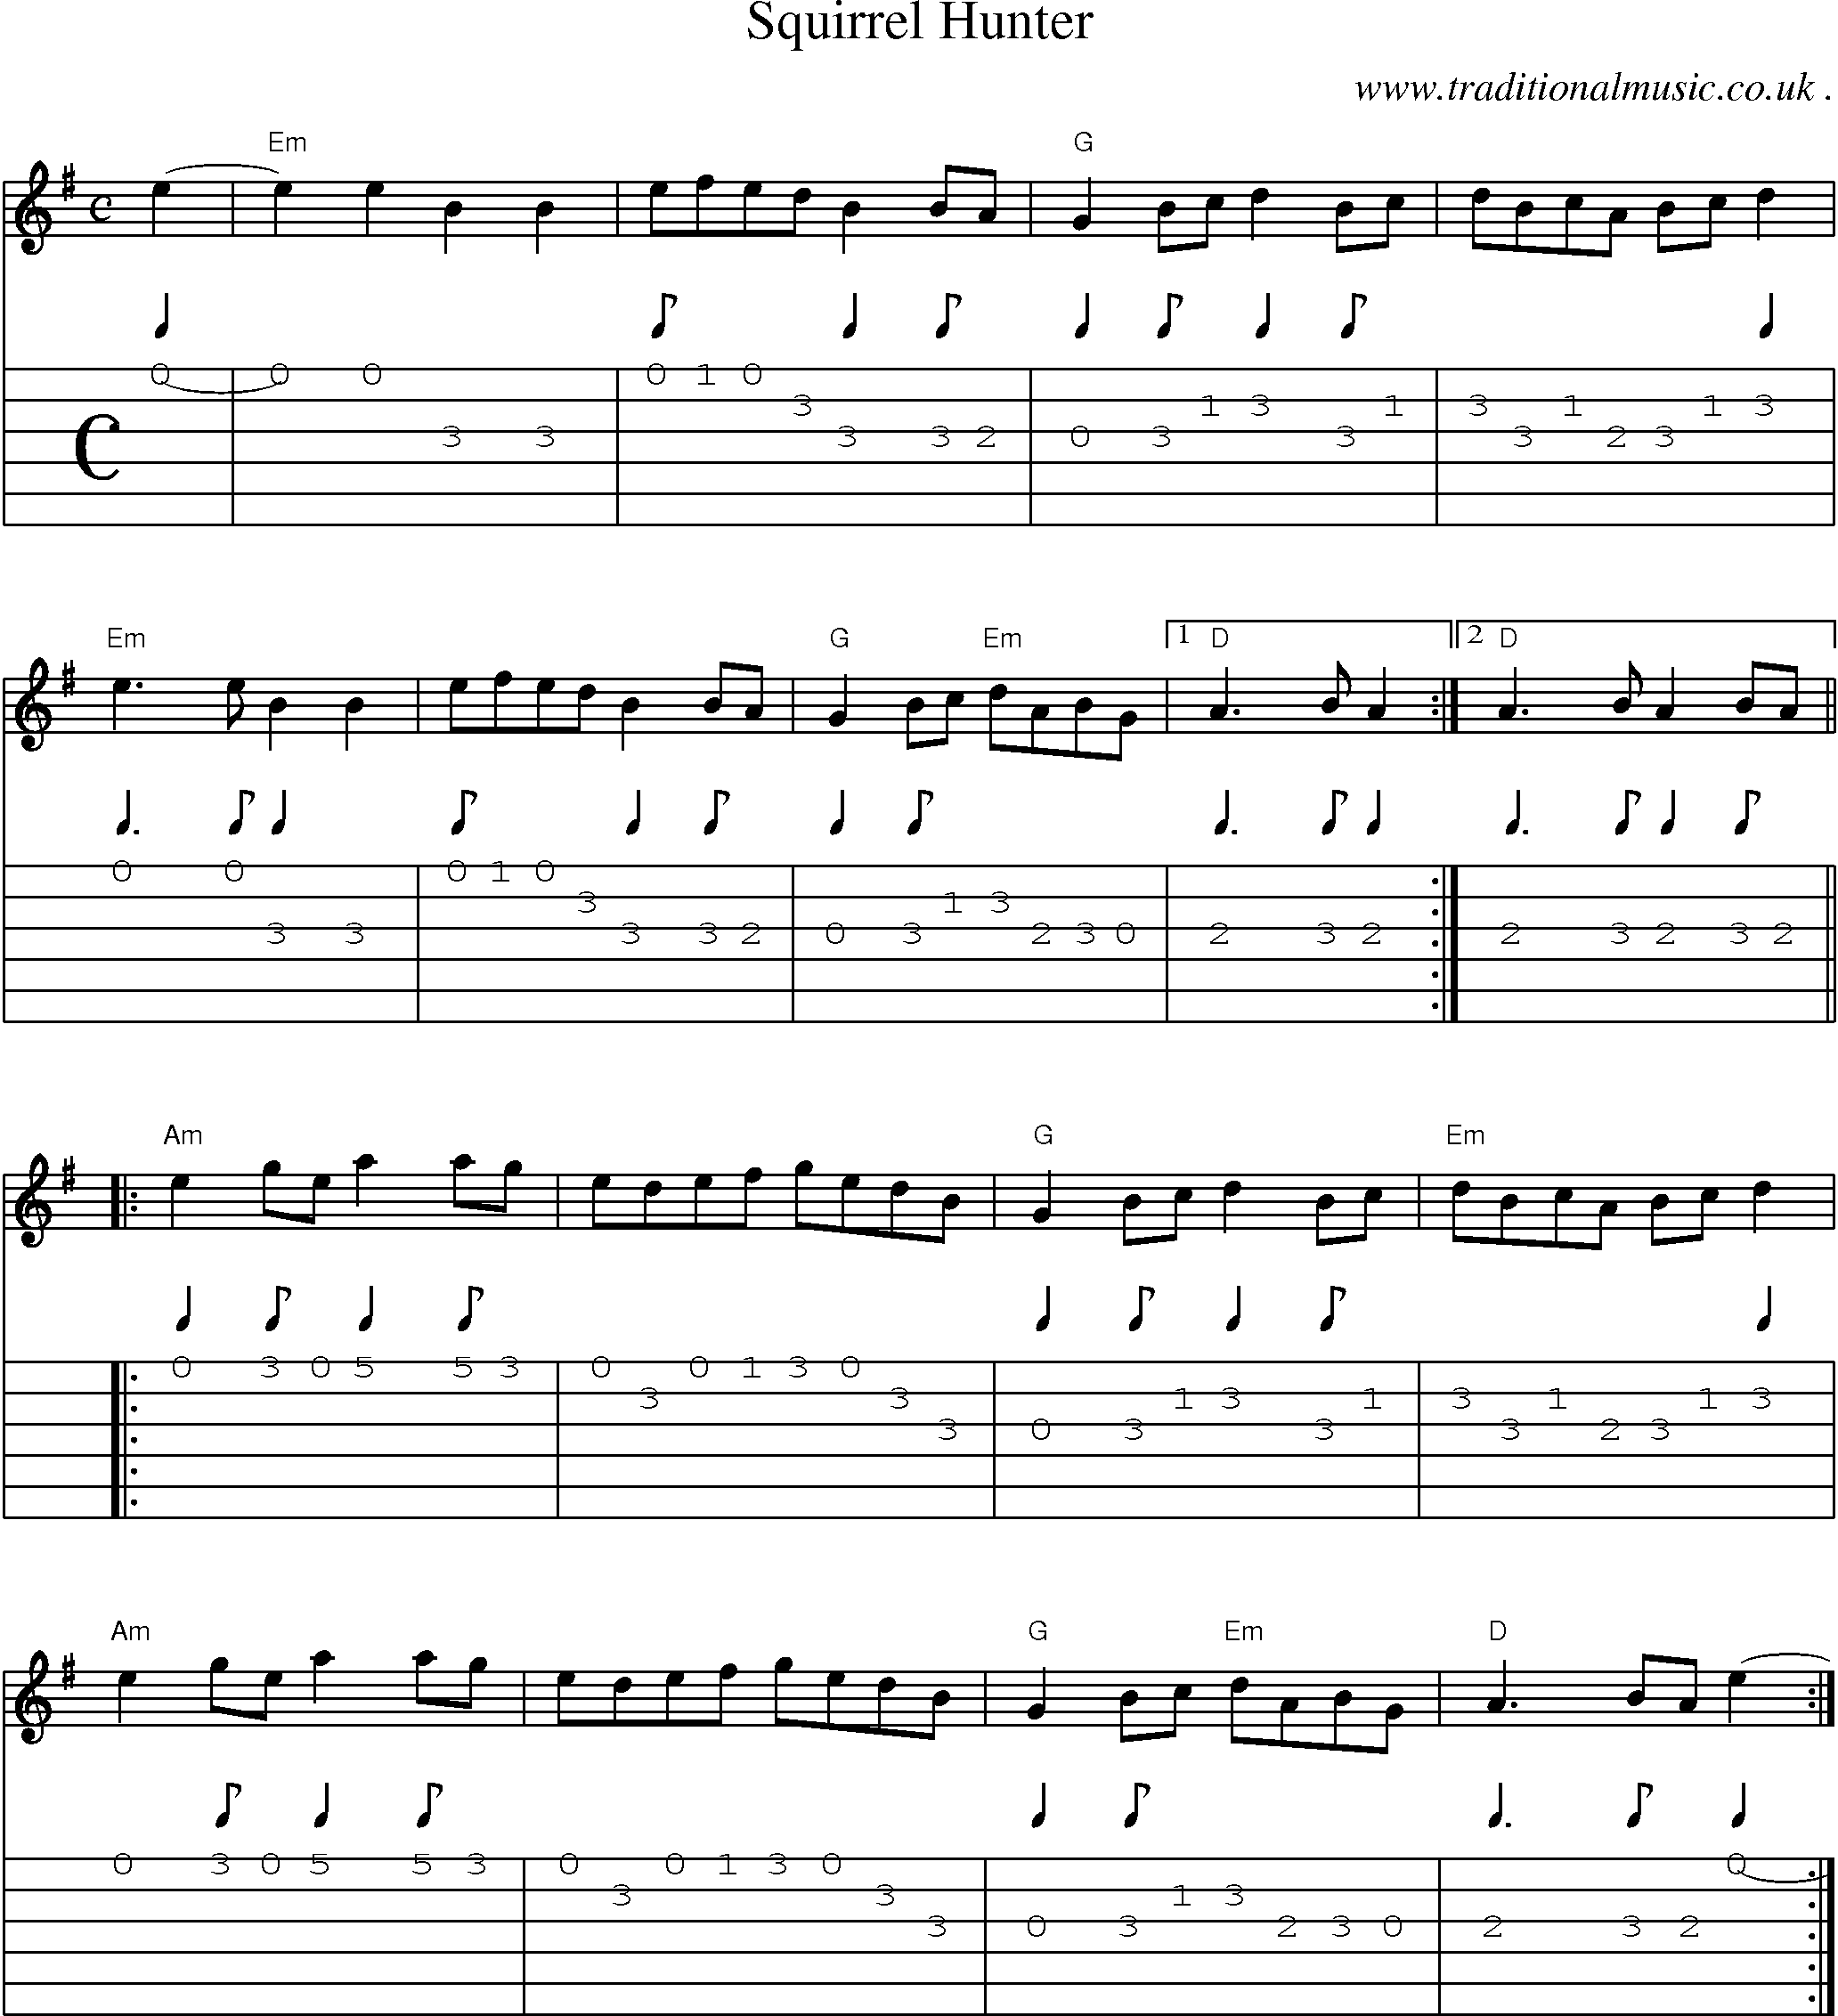 Music Score and Guitar Tabs for Squirrel Hunter